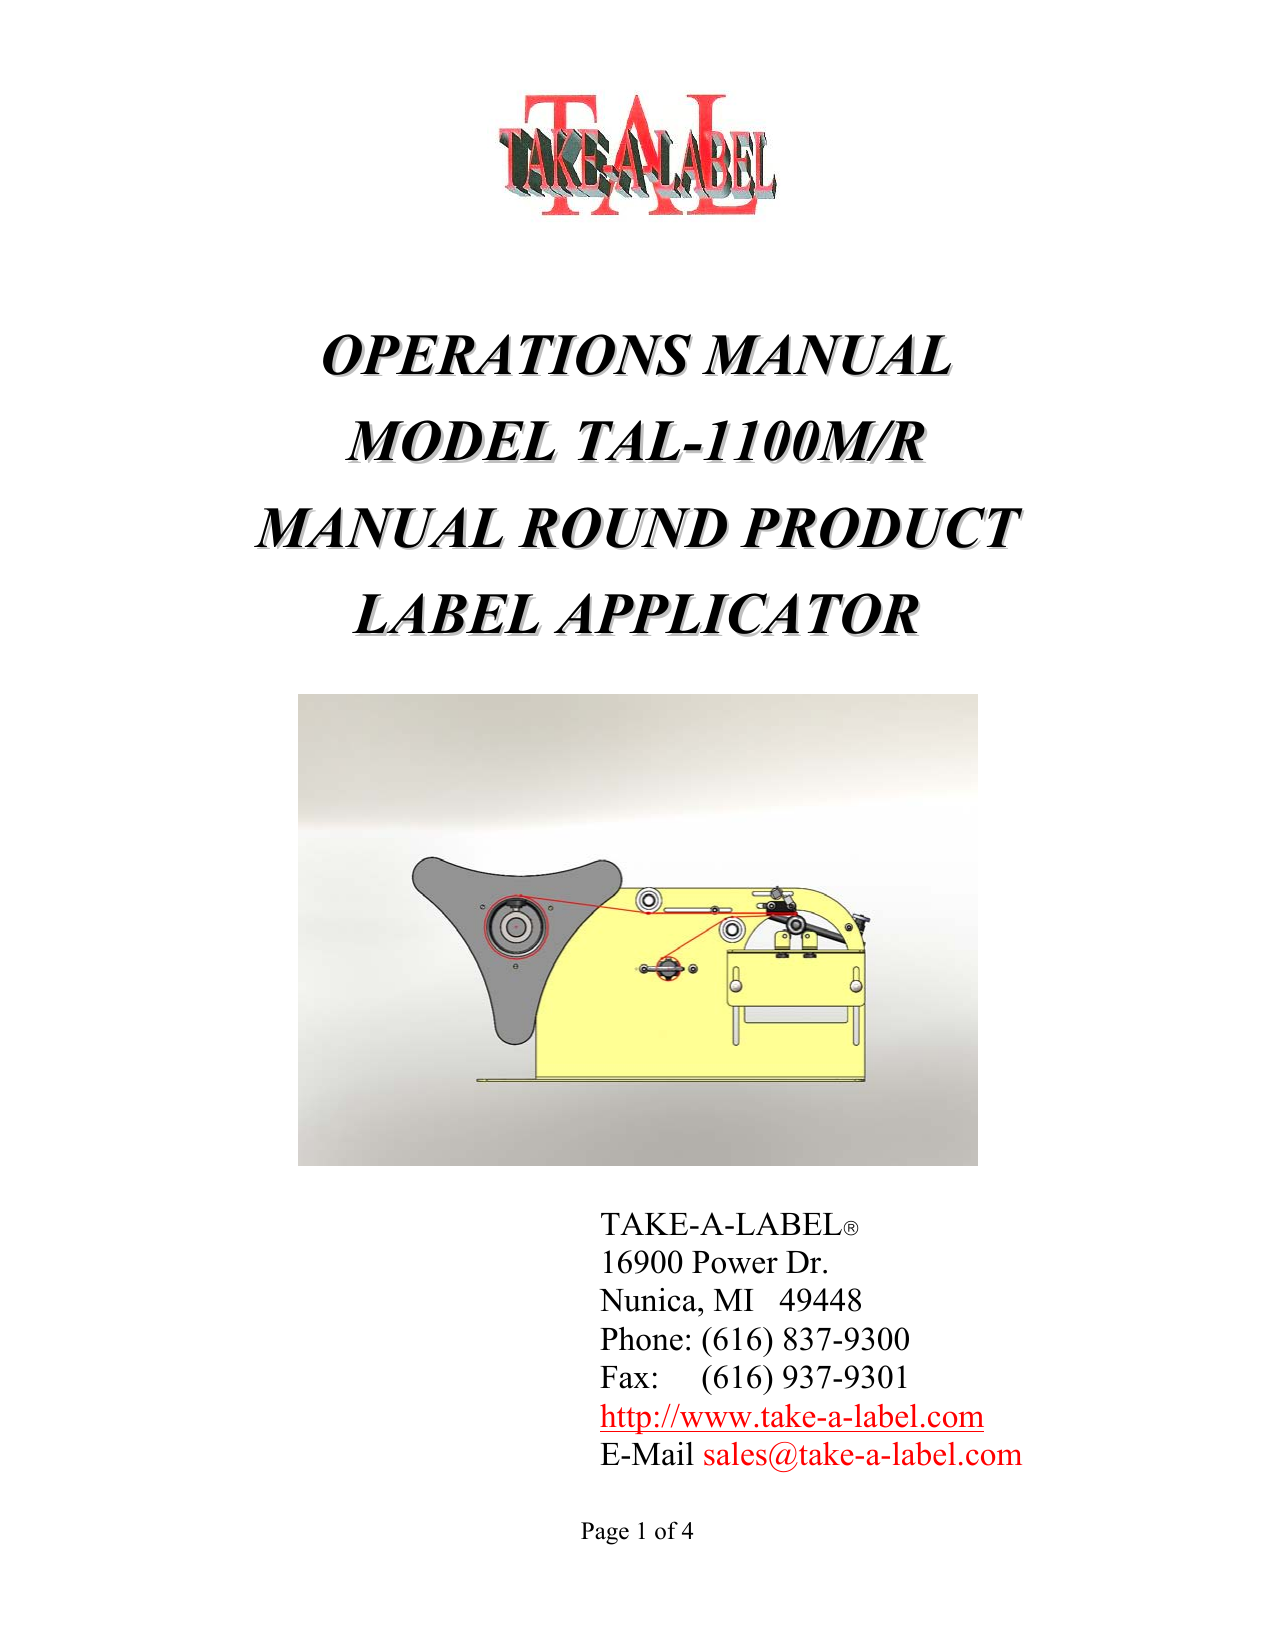 TAL-1100MR Manual Round Product Label Applicator